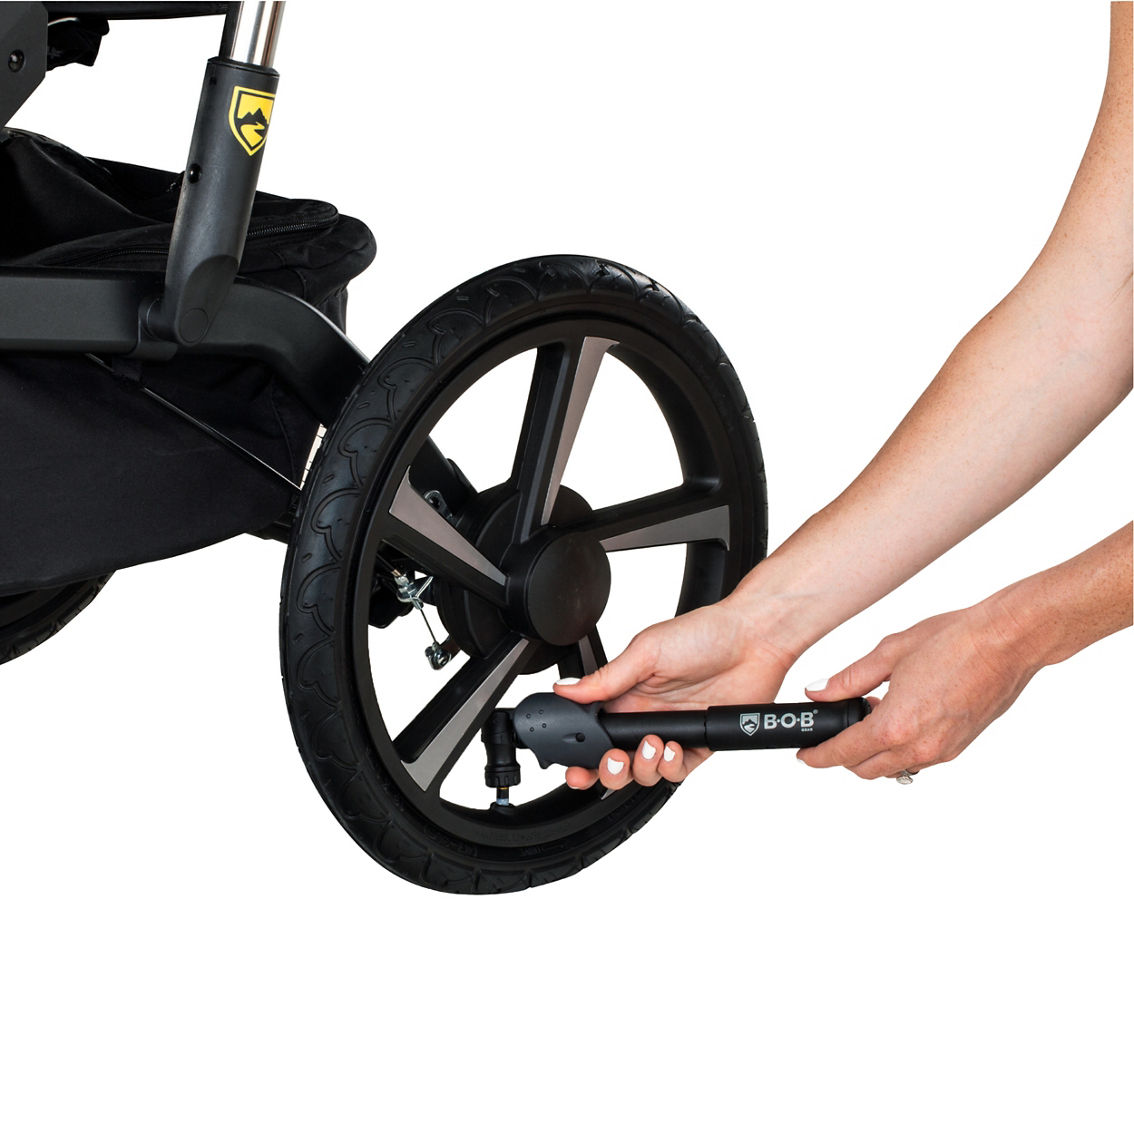 BOB Gear Deluxe Handlebar Console with Tire Pump for Single Jogging Strollers - Image 2 of 2